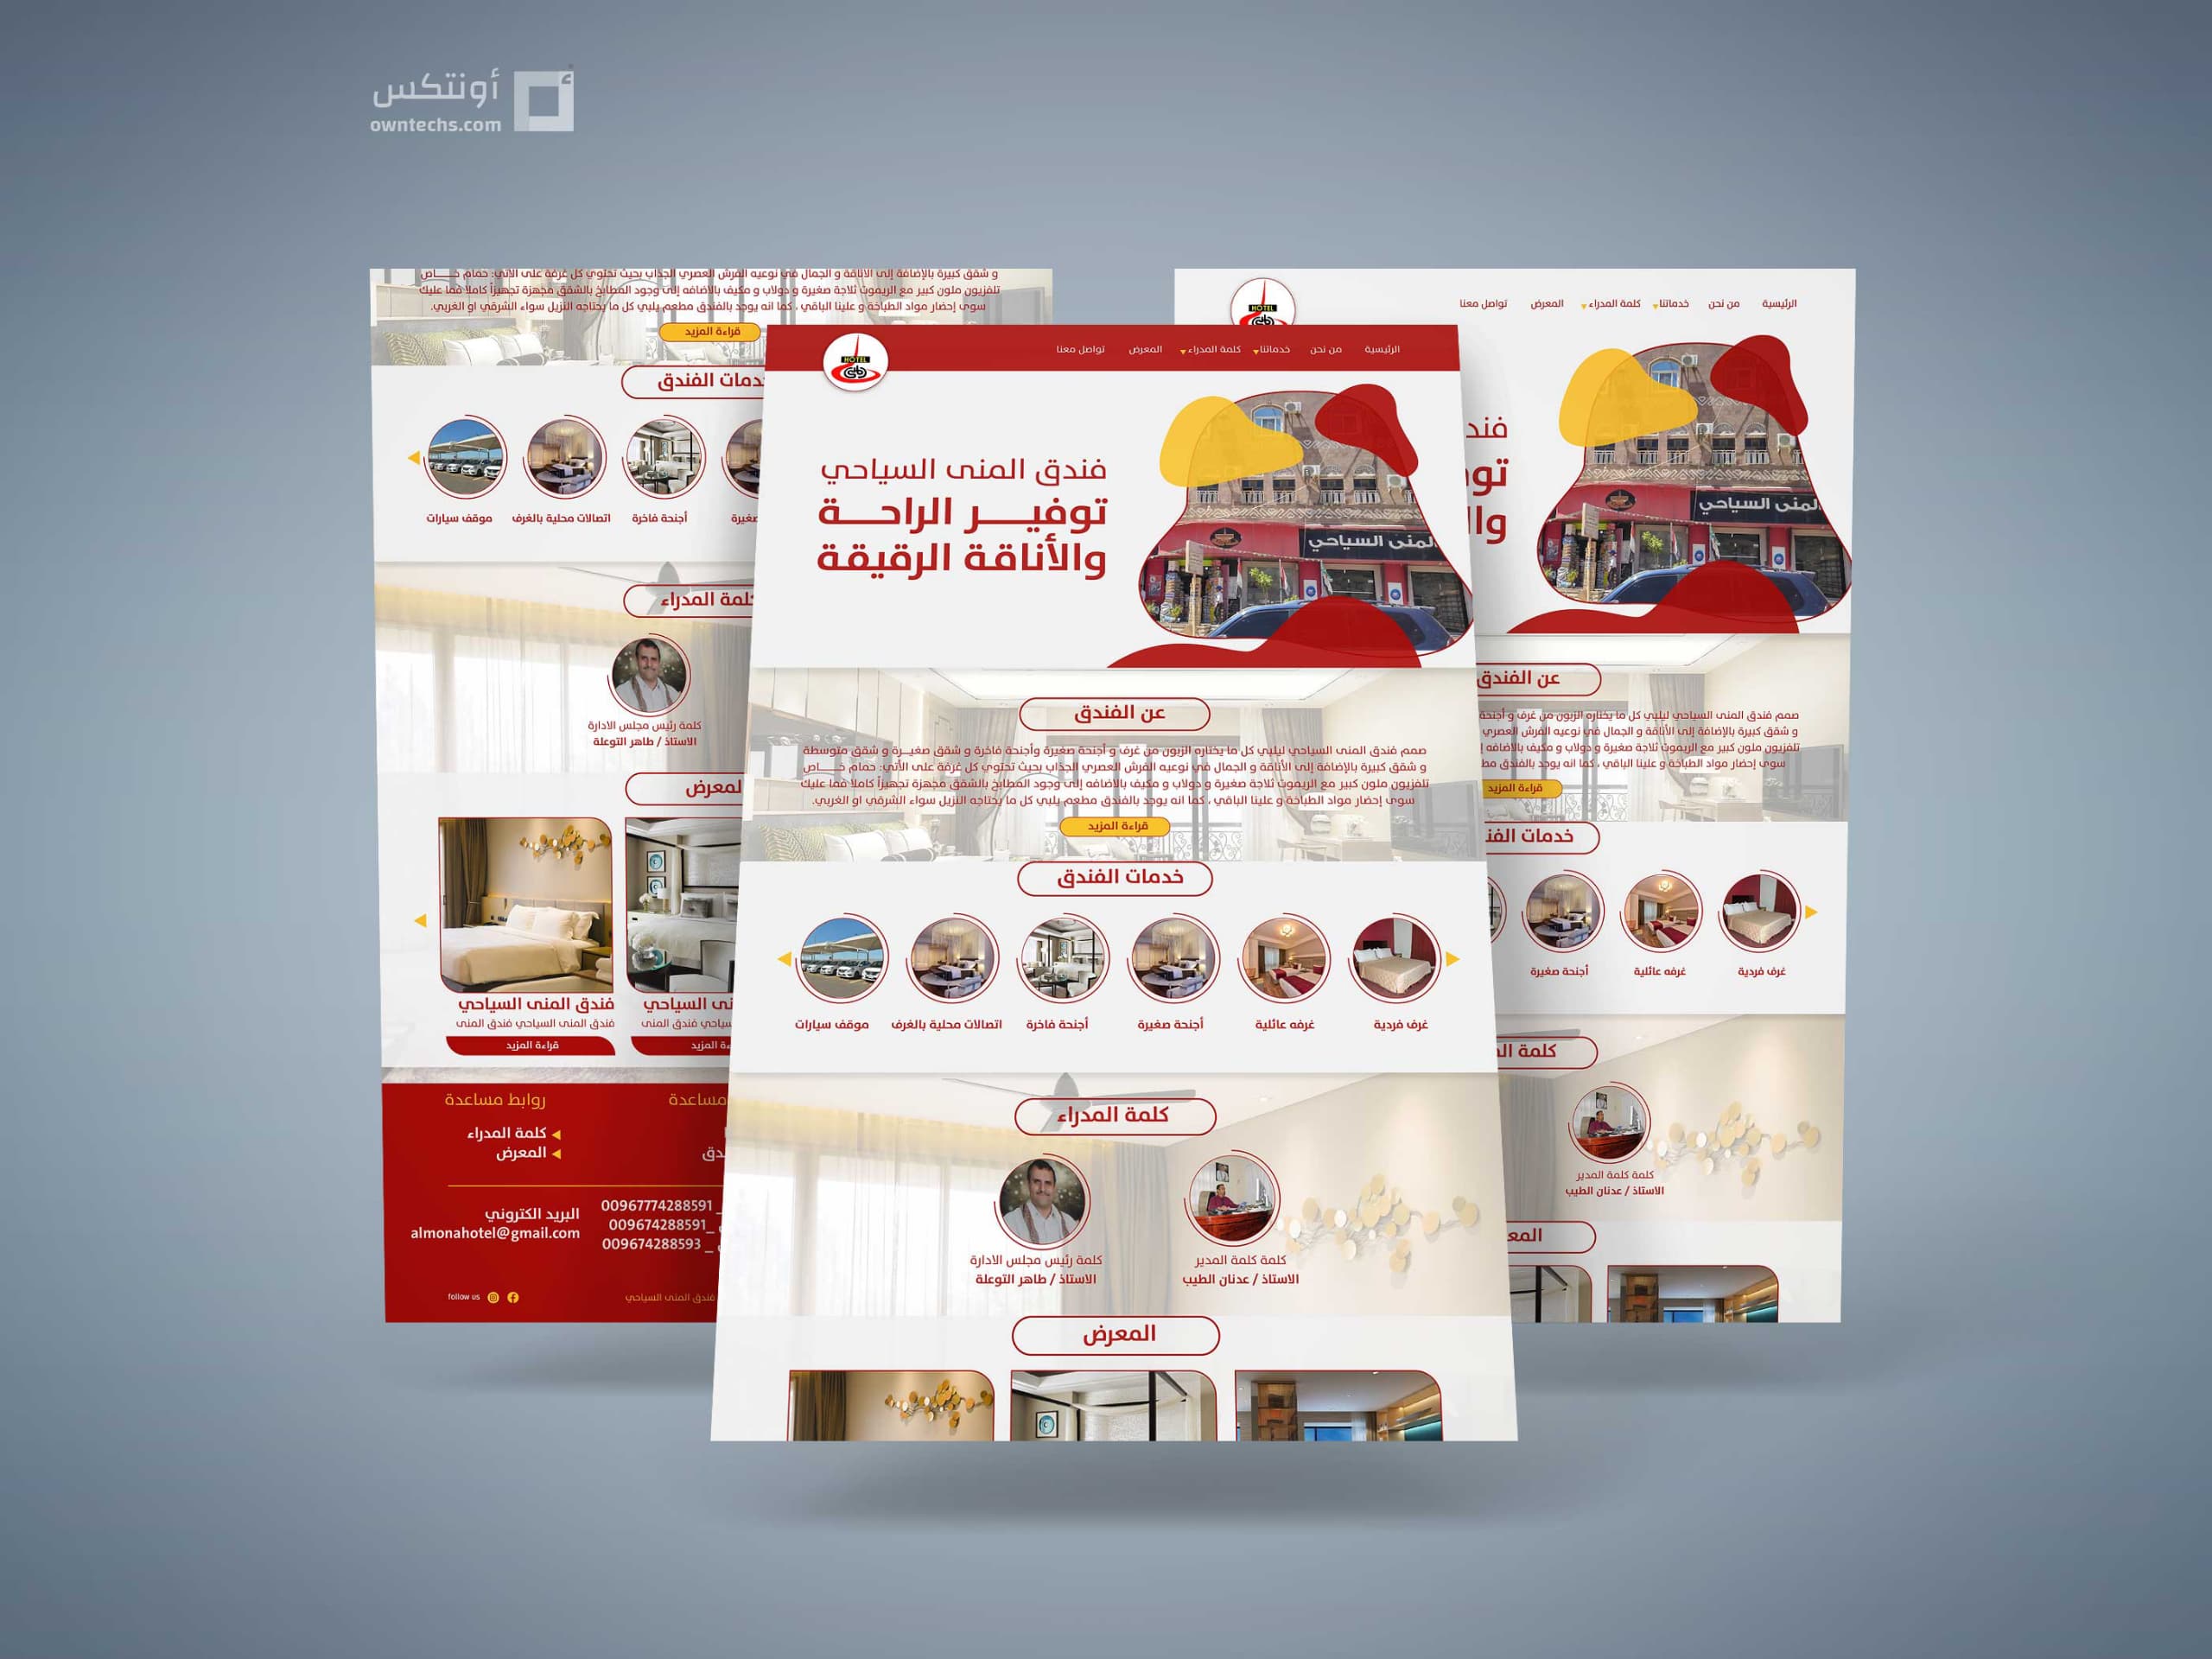 Delma company for designs,websites, domains and web hosting